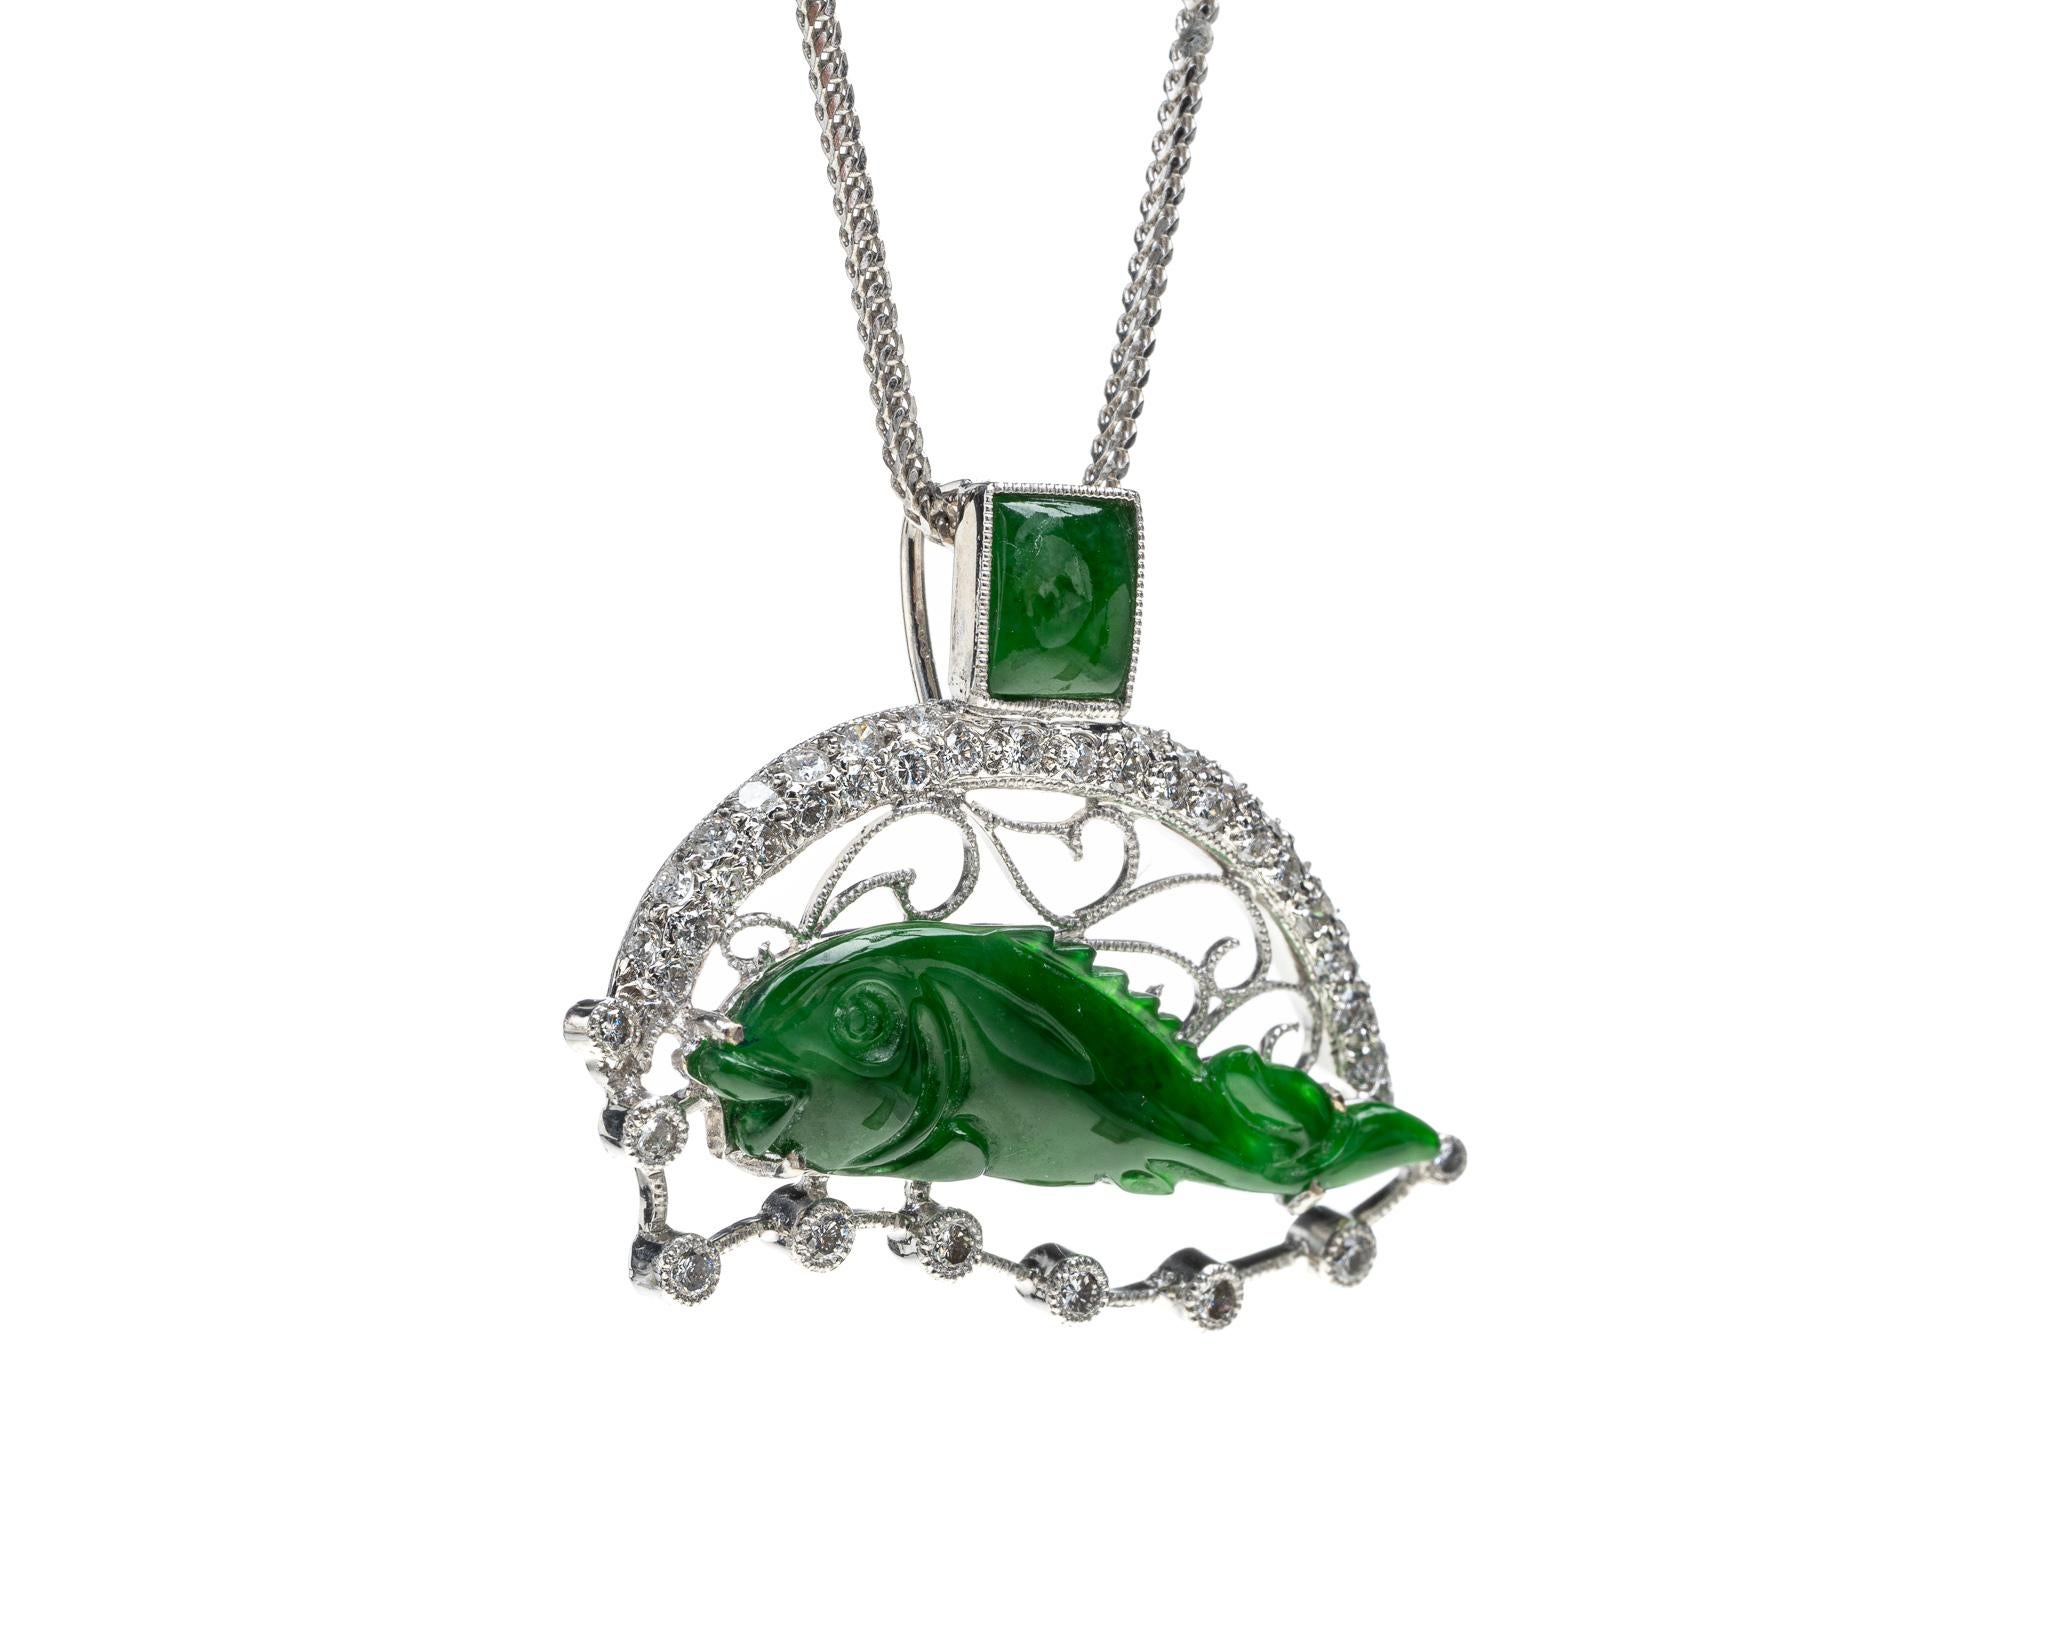 This is an all natural, untreated jadeite jade carved fish pendant set on an 18K white gold and diamond bail.  The carved fish symbolizes wealth and prosperity.

It measures 0.90 inches (23 mm) x 1.15 inches (29.3 mm) with thickness of 0.16 inches